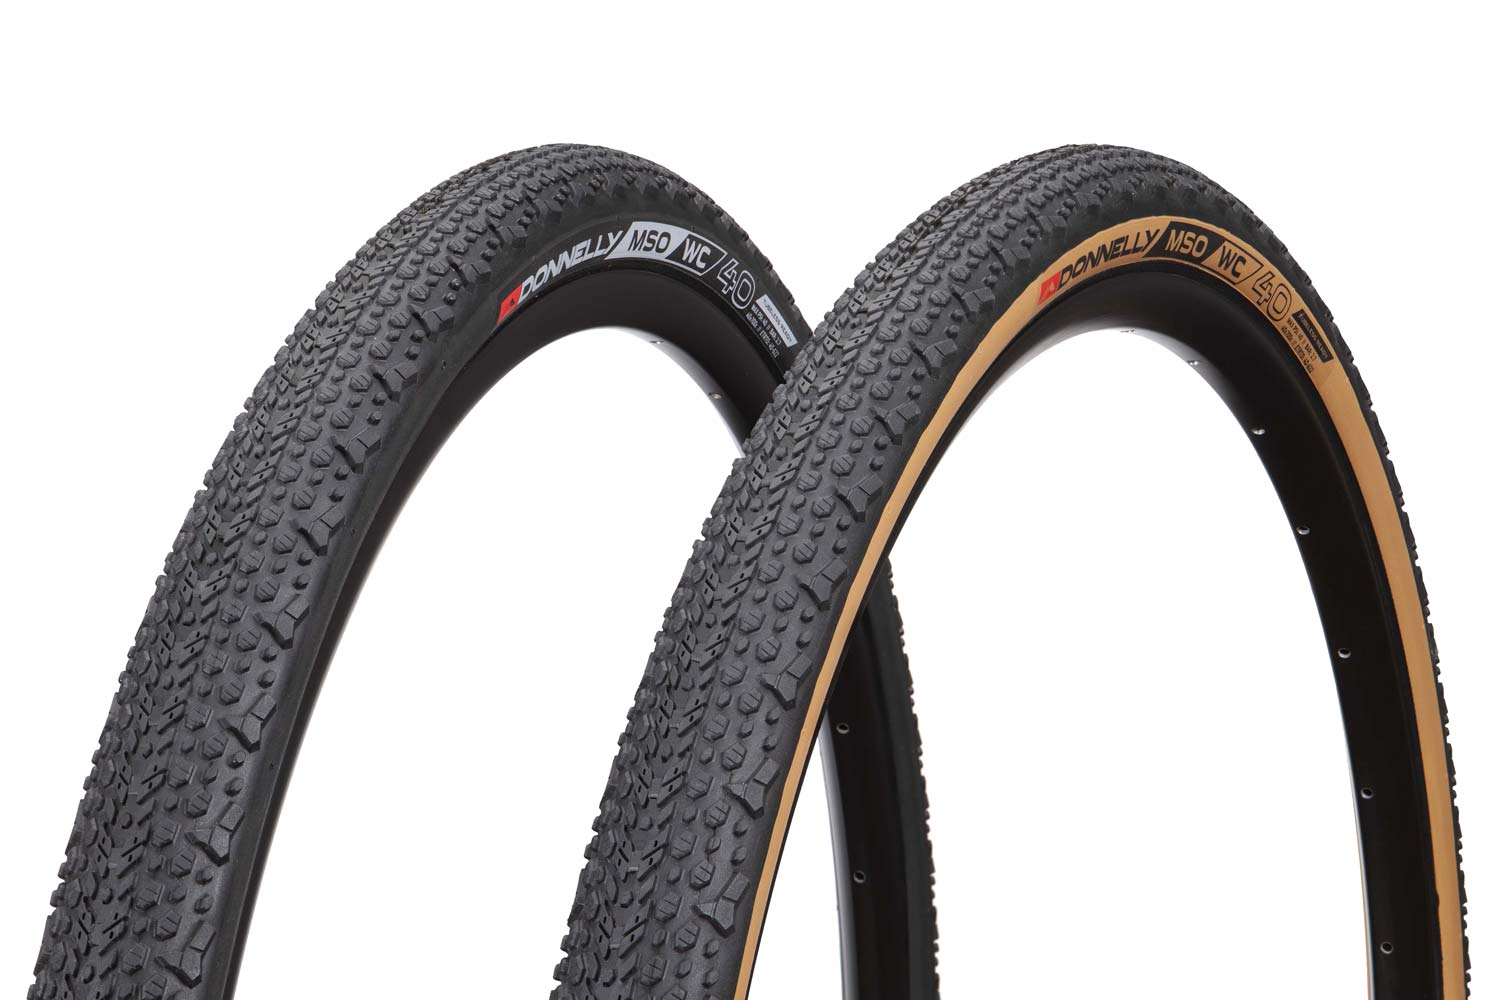 Donnelly MSO WC premium gravel race tire, Europe-made 240tpi lightweight tubeless gravel tire